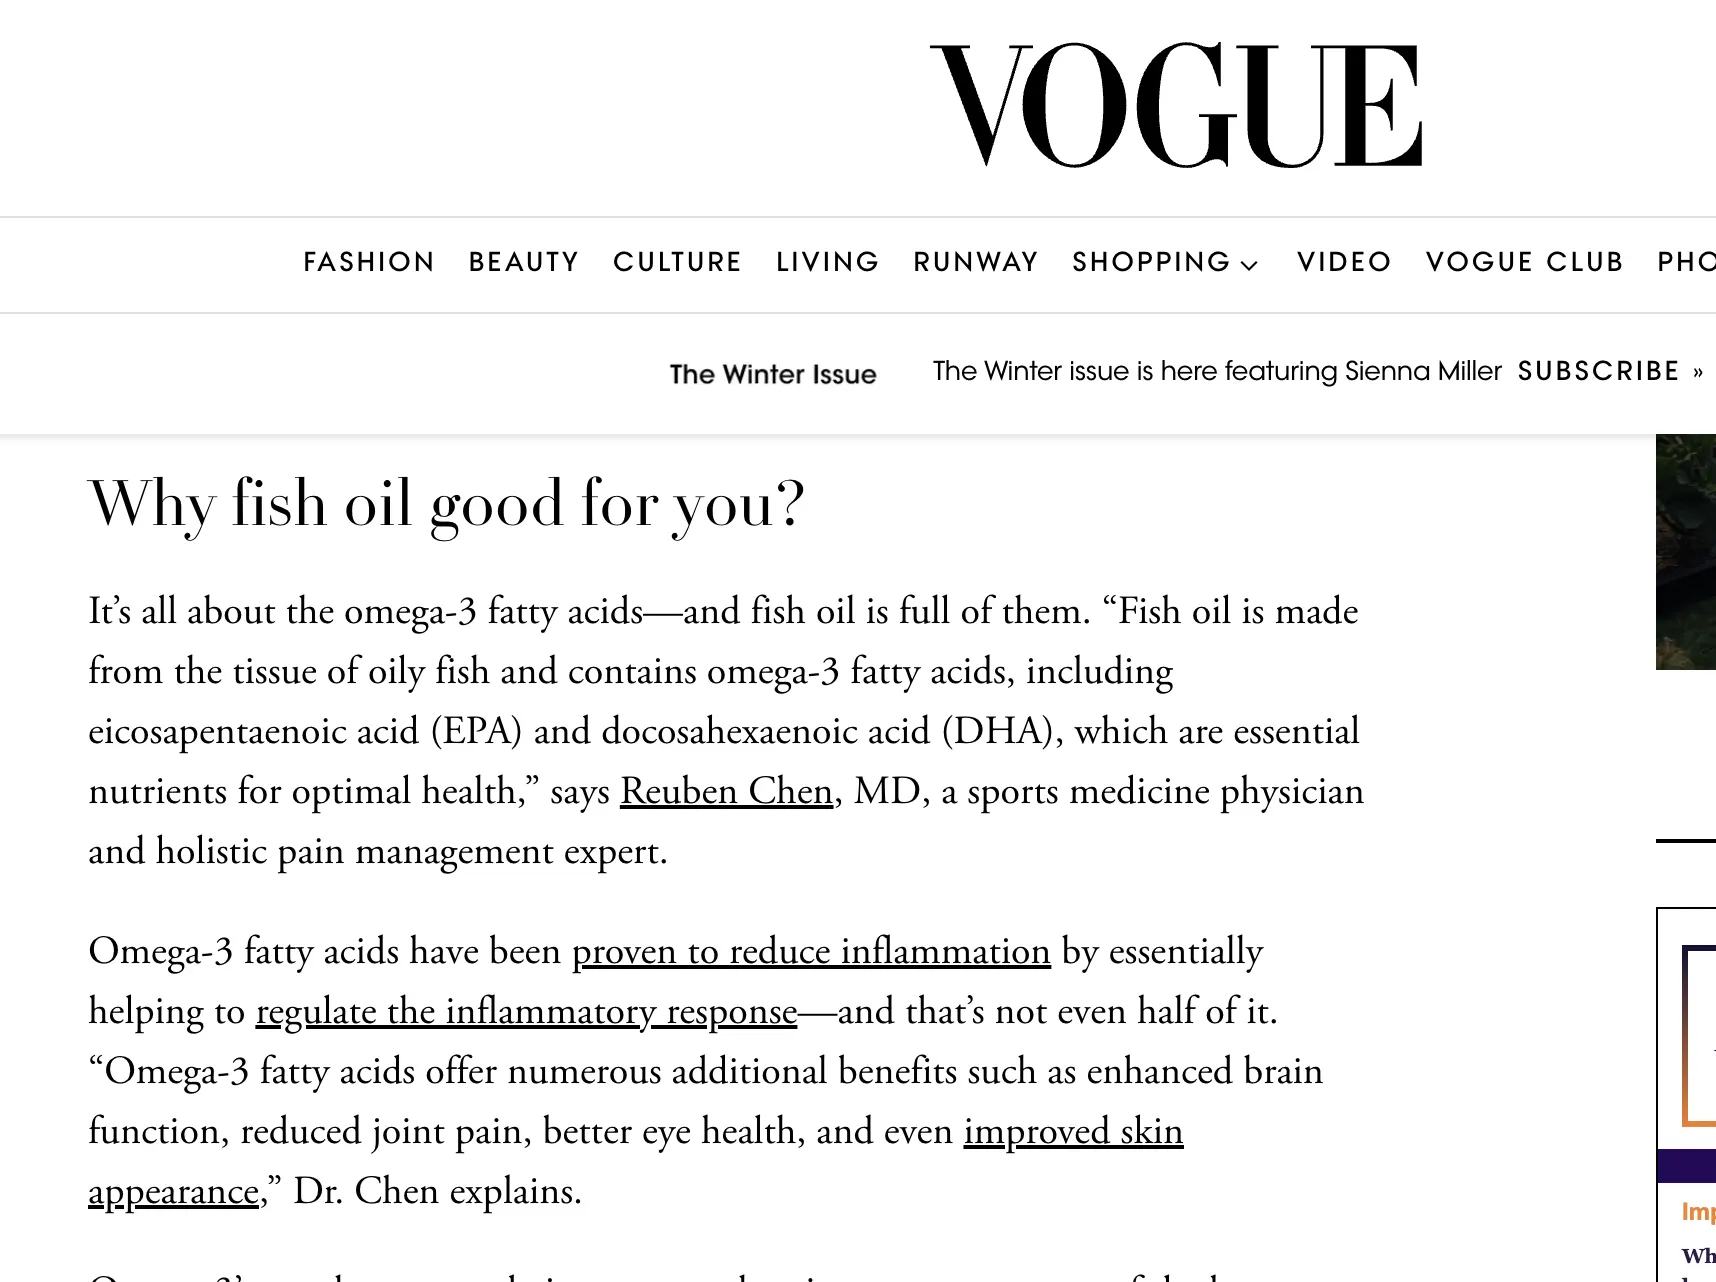 Dr. Reuben Chen Provides Insights on Fish Oil and Inflammation in Vogue Magazine 2